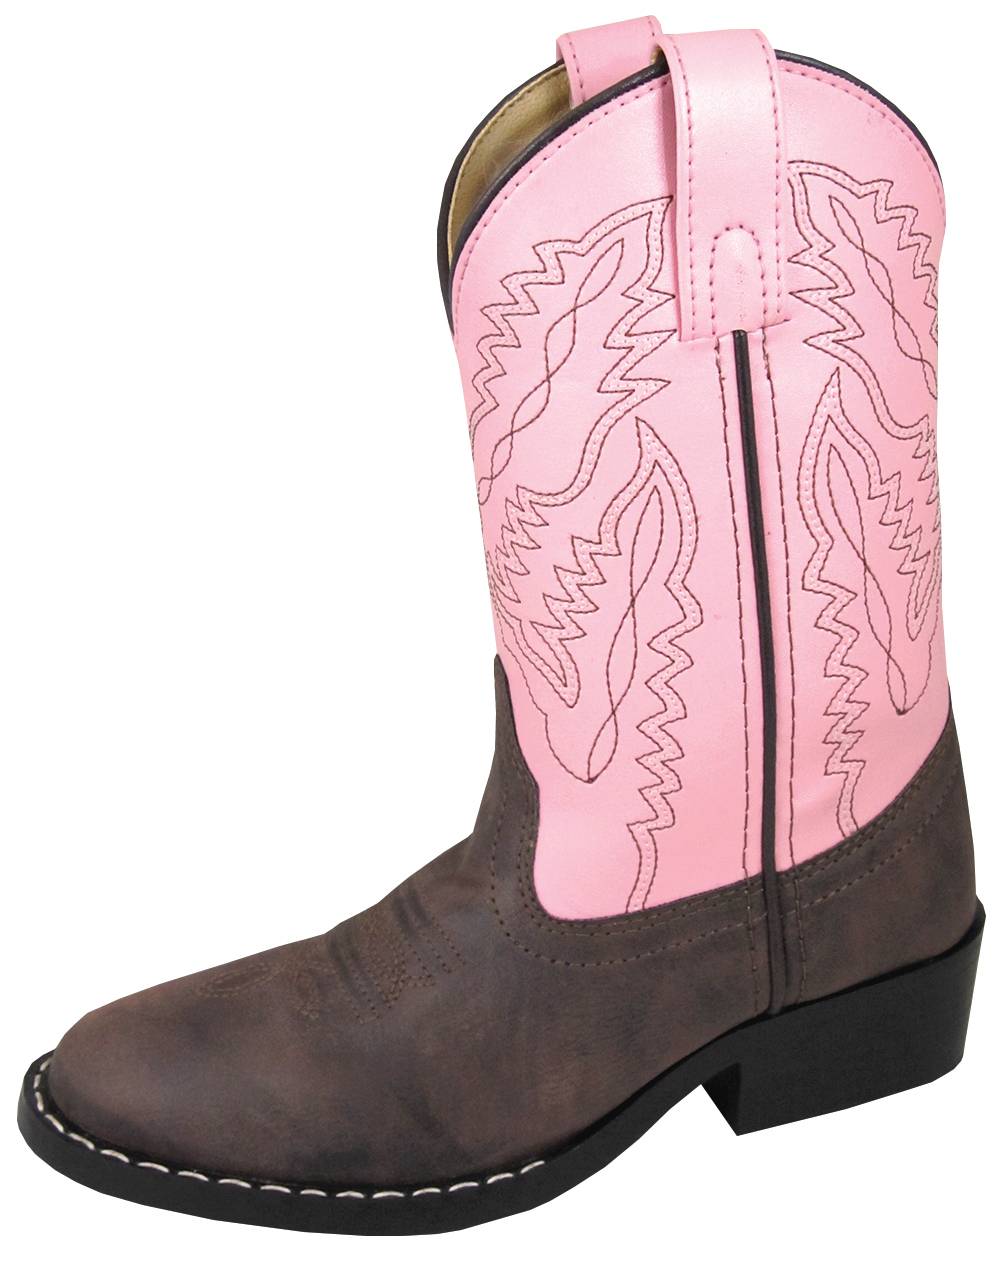 toddlers riding boots